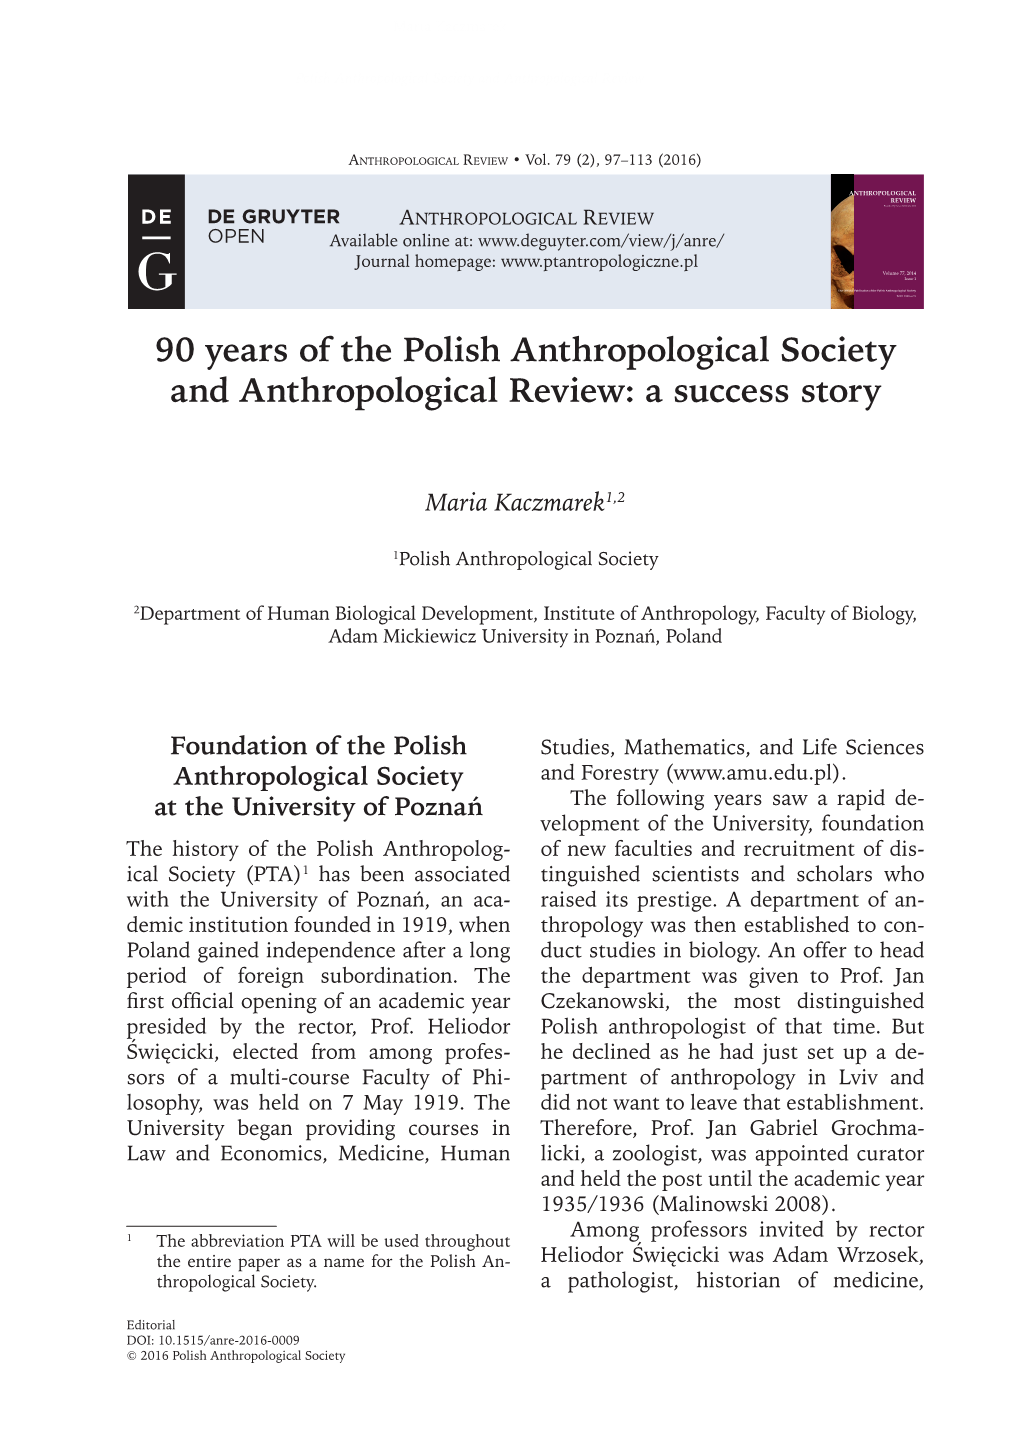 90 Years of the Polish Anthropological Society and Anthropological Review: a Success Story